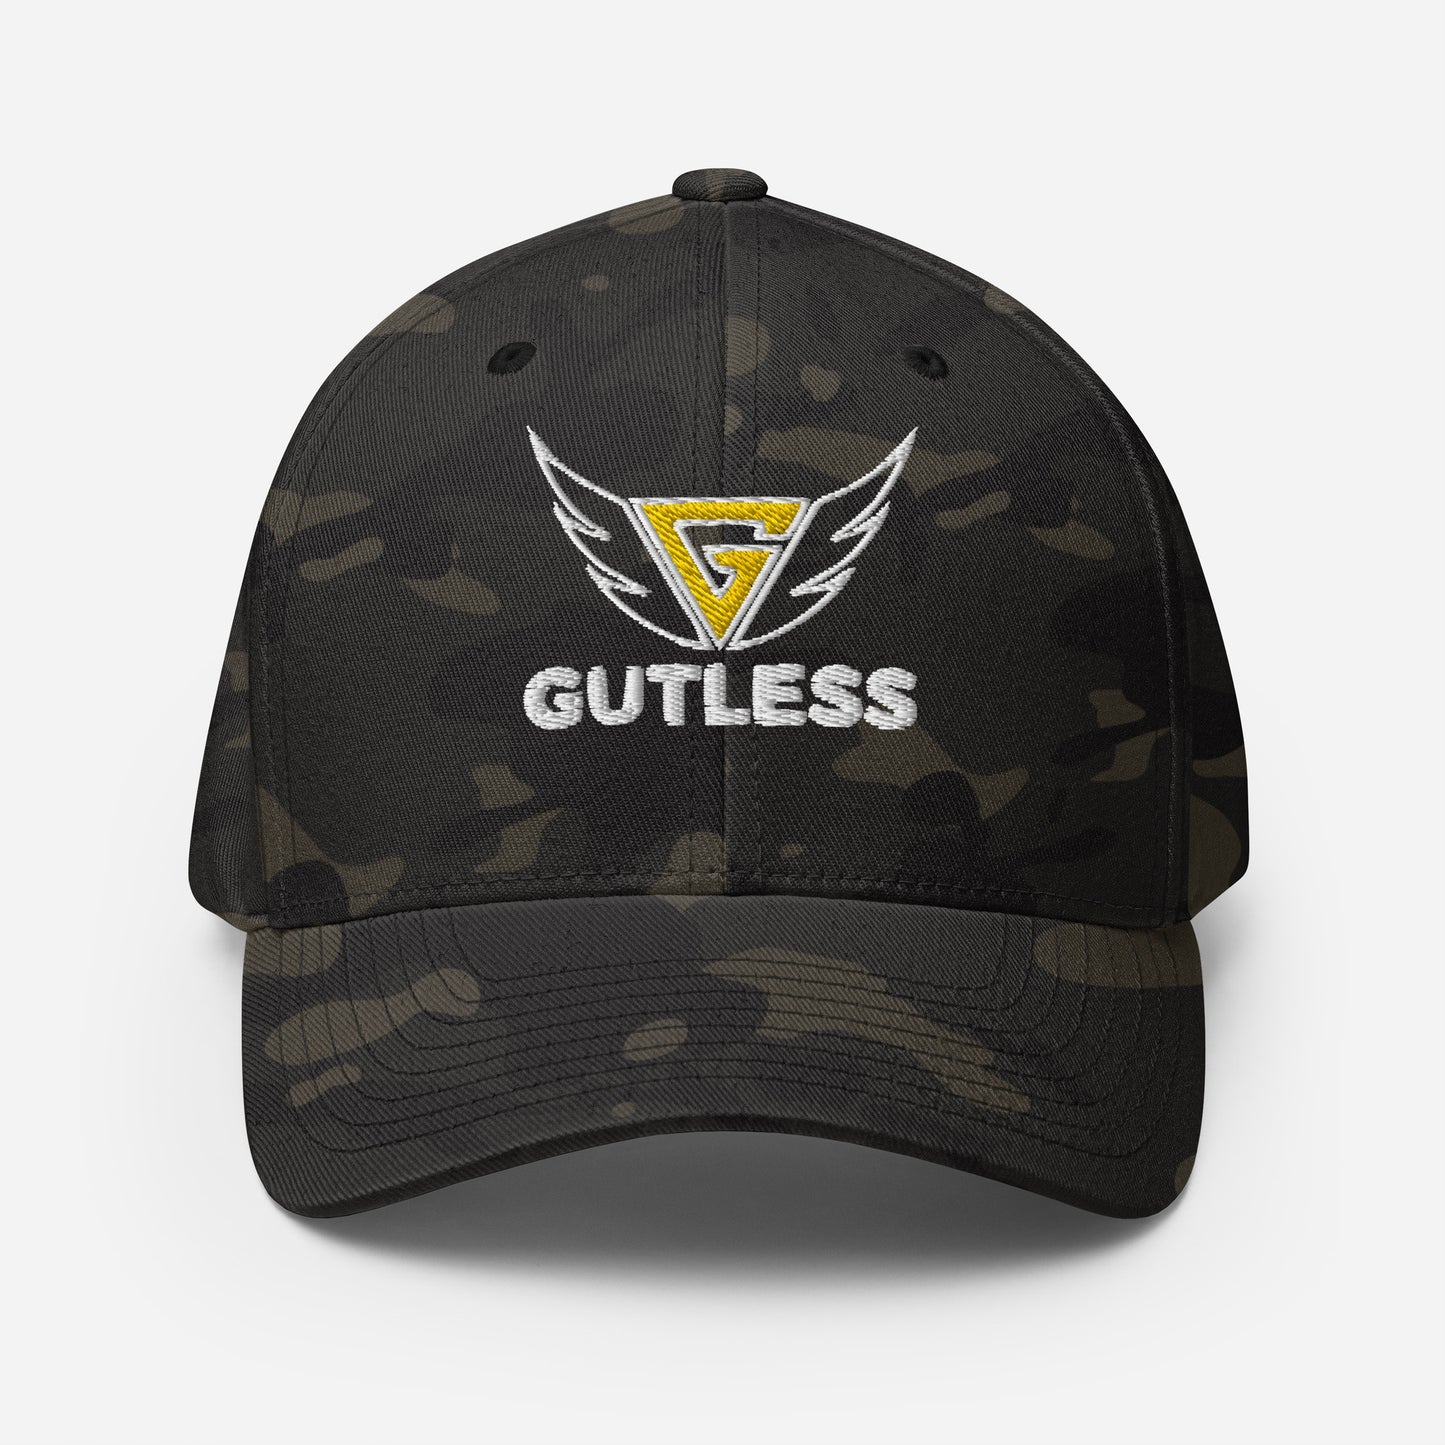 GUTLESS Fitted Structured Twill Cap